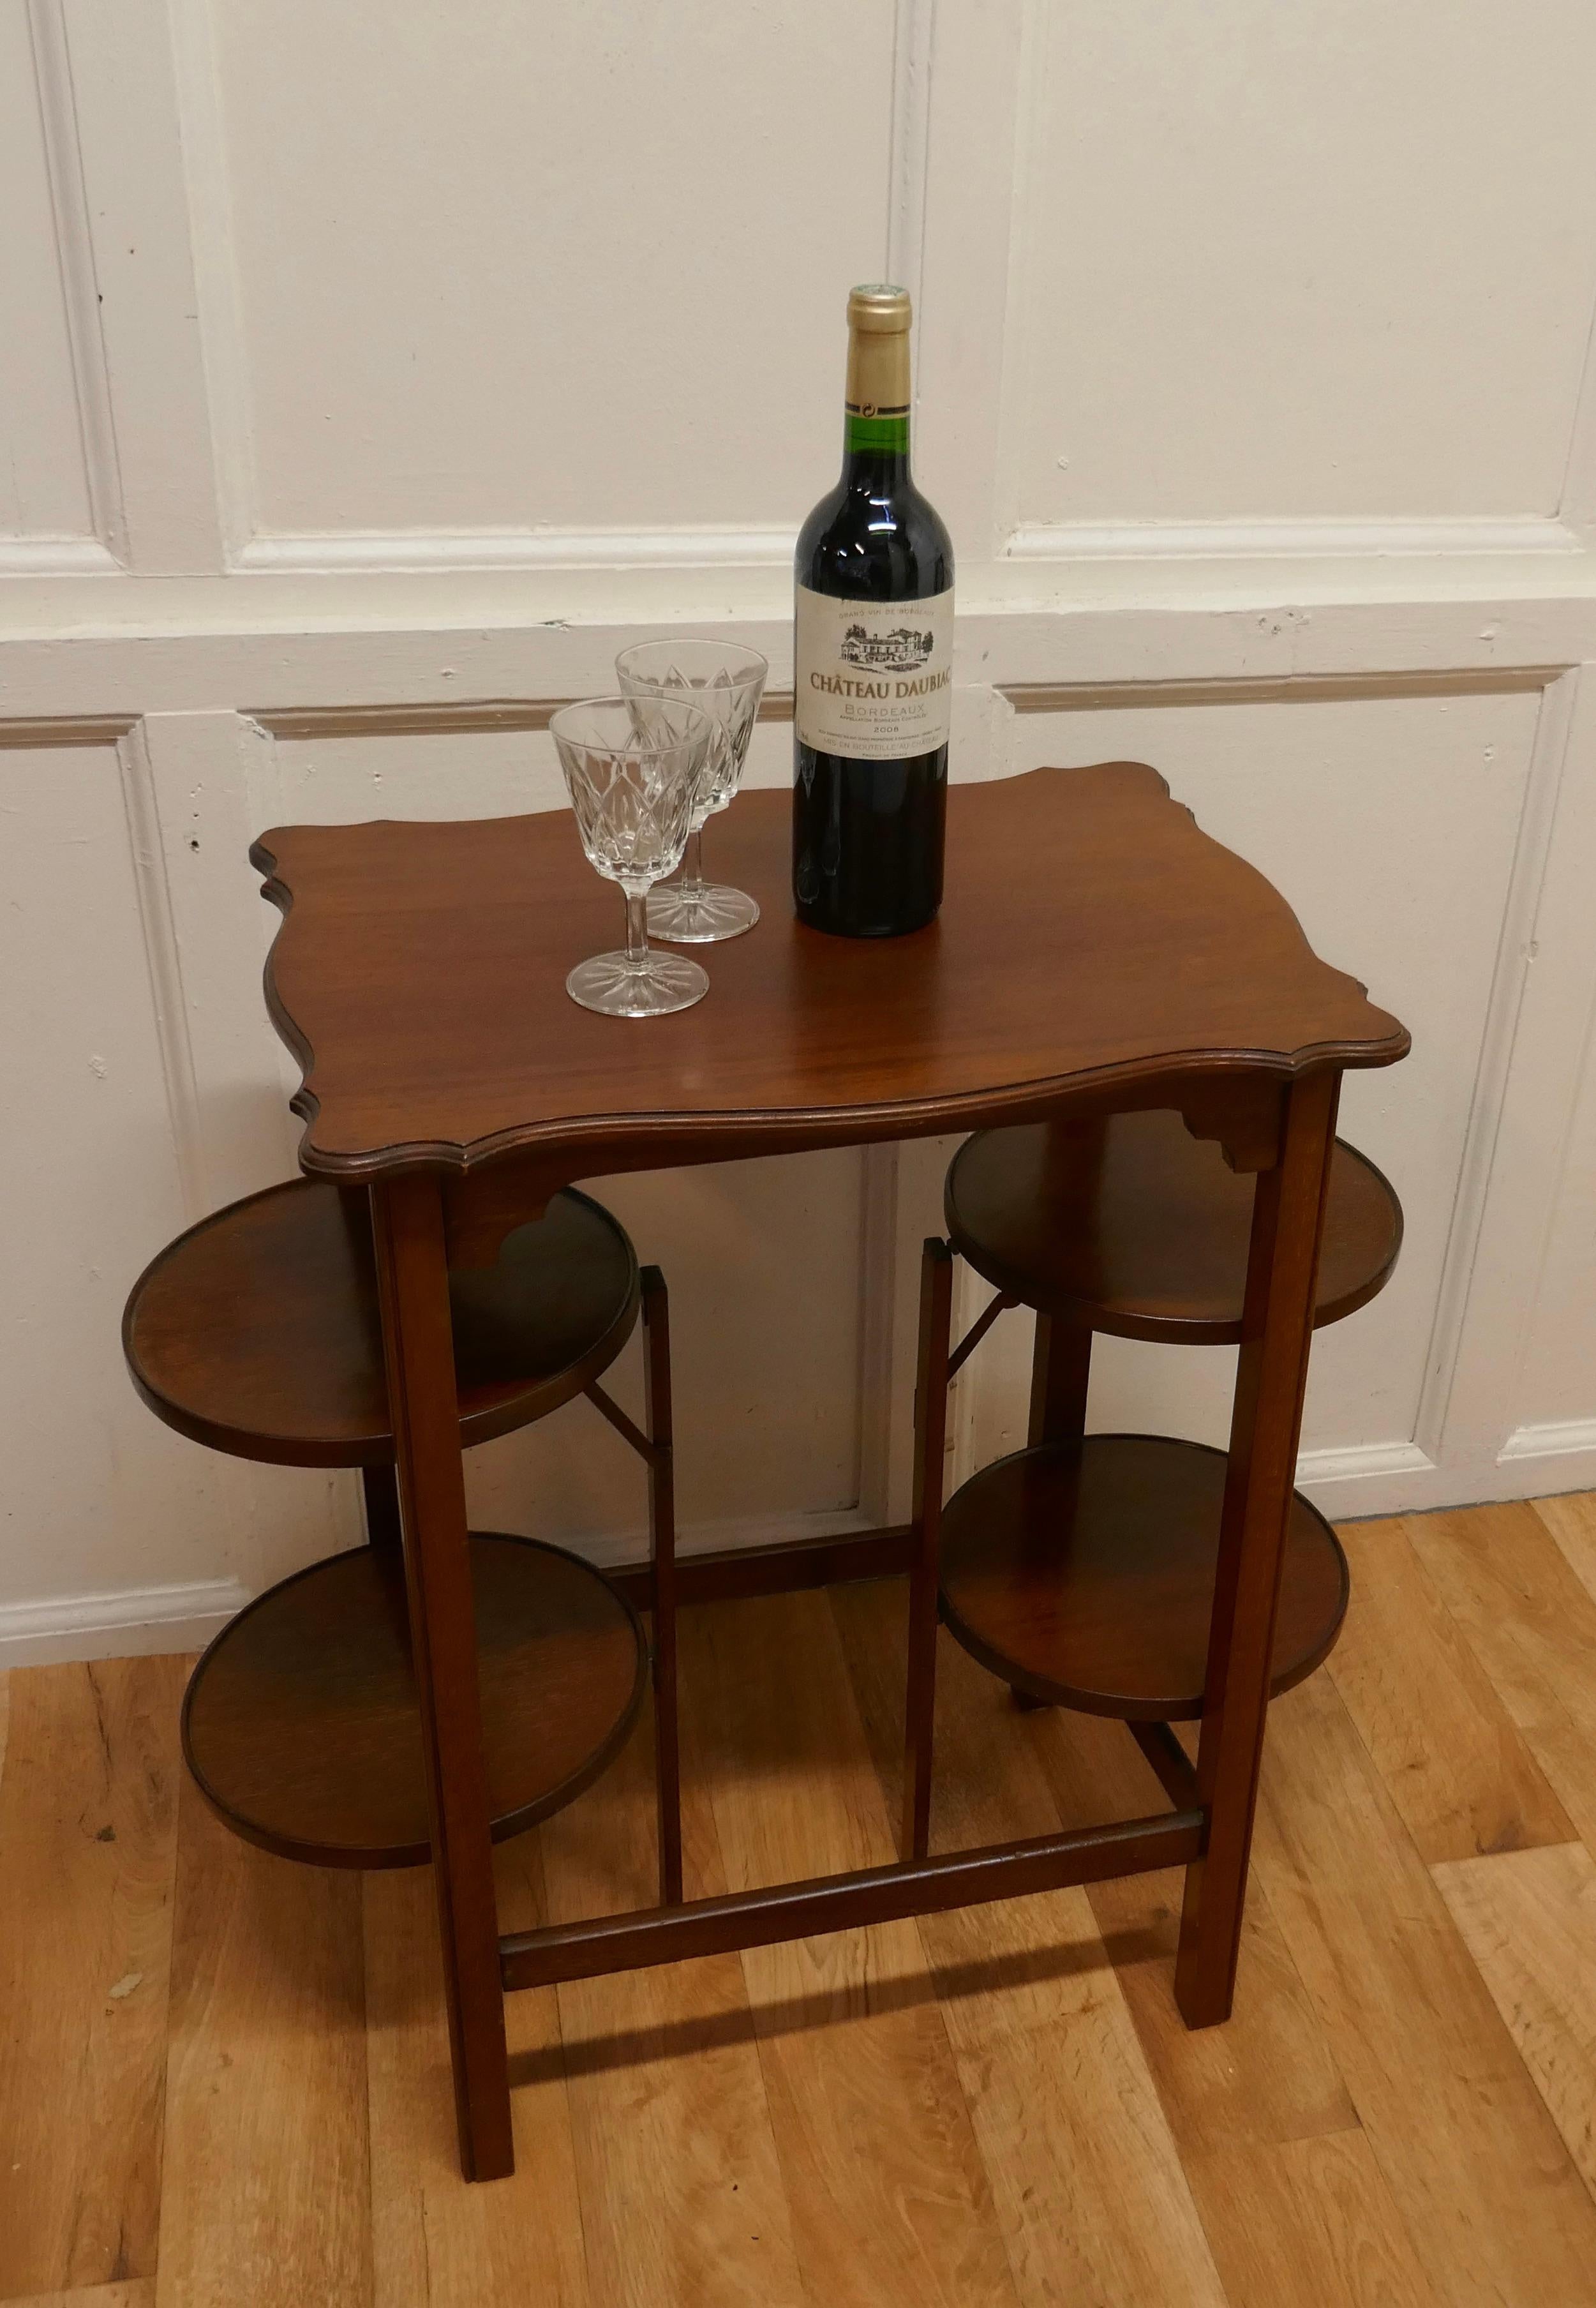 4 Tray Mahogany Table Cake Stand or Dumb Waiter In Good Condition For Sale In Chillerton, Isle of Wight